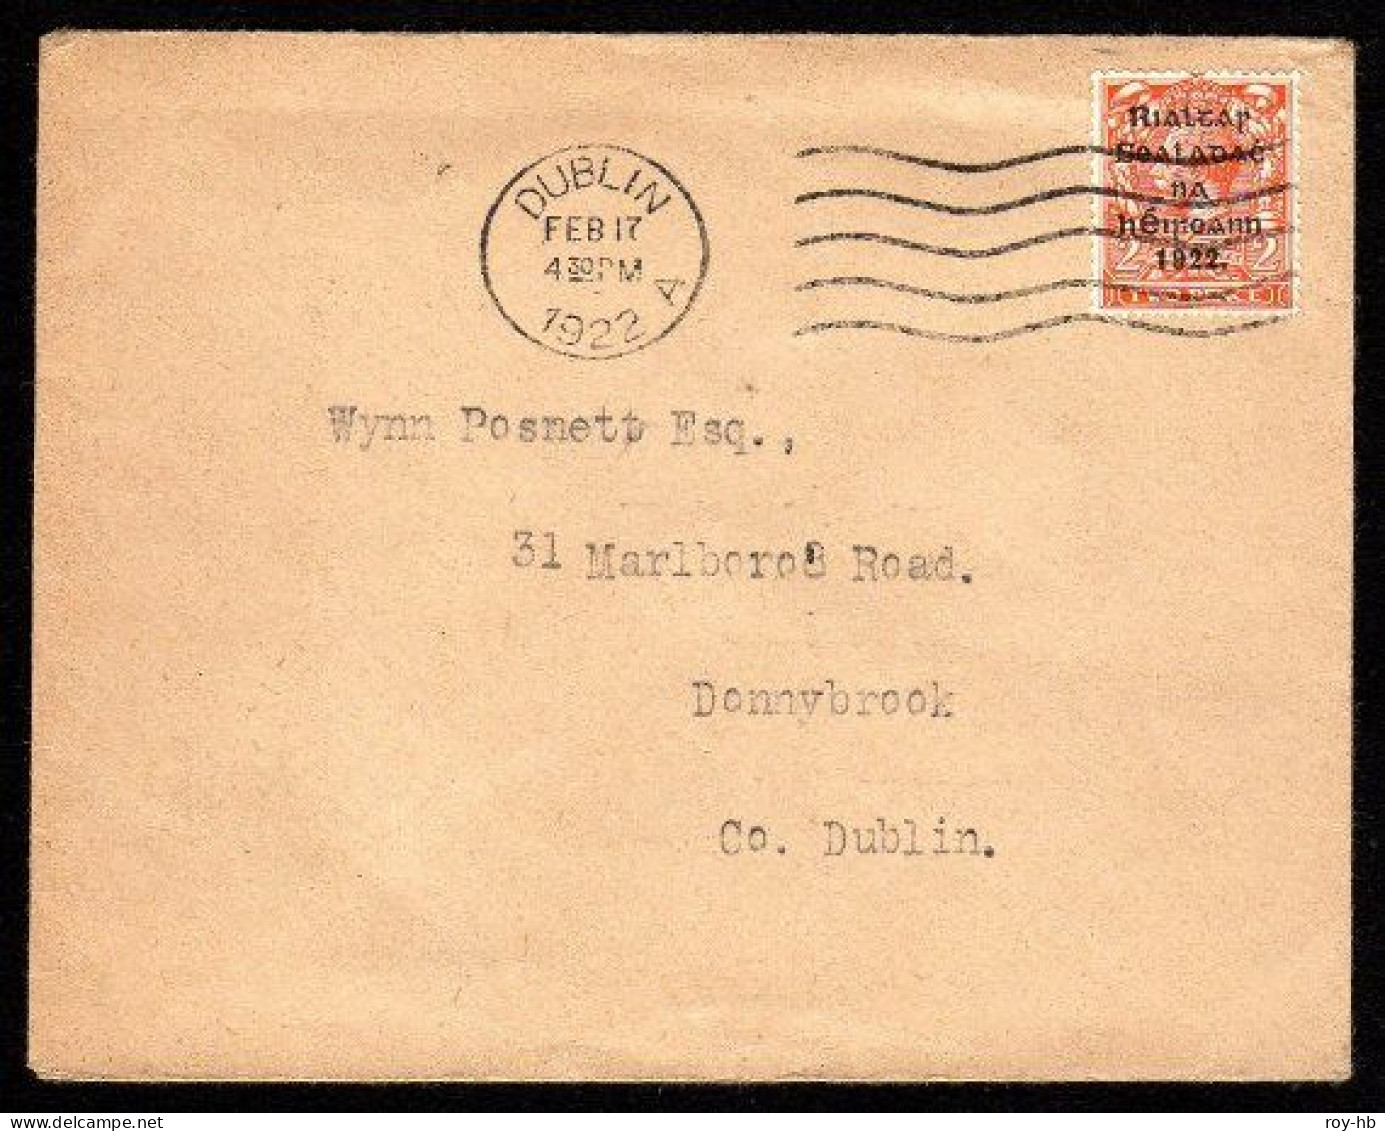 1922 Thom 2d Die II Single On A Local Dublin Cover, Well Tied By A Clear Machine Cancel For 17 FE 22, The First Day. - Covers & Documents